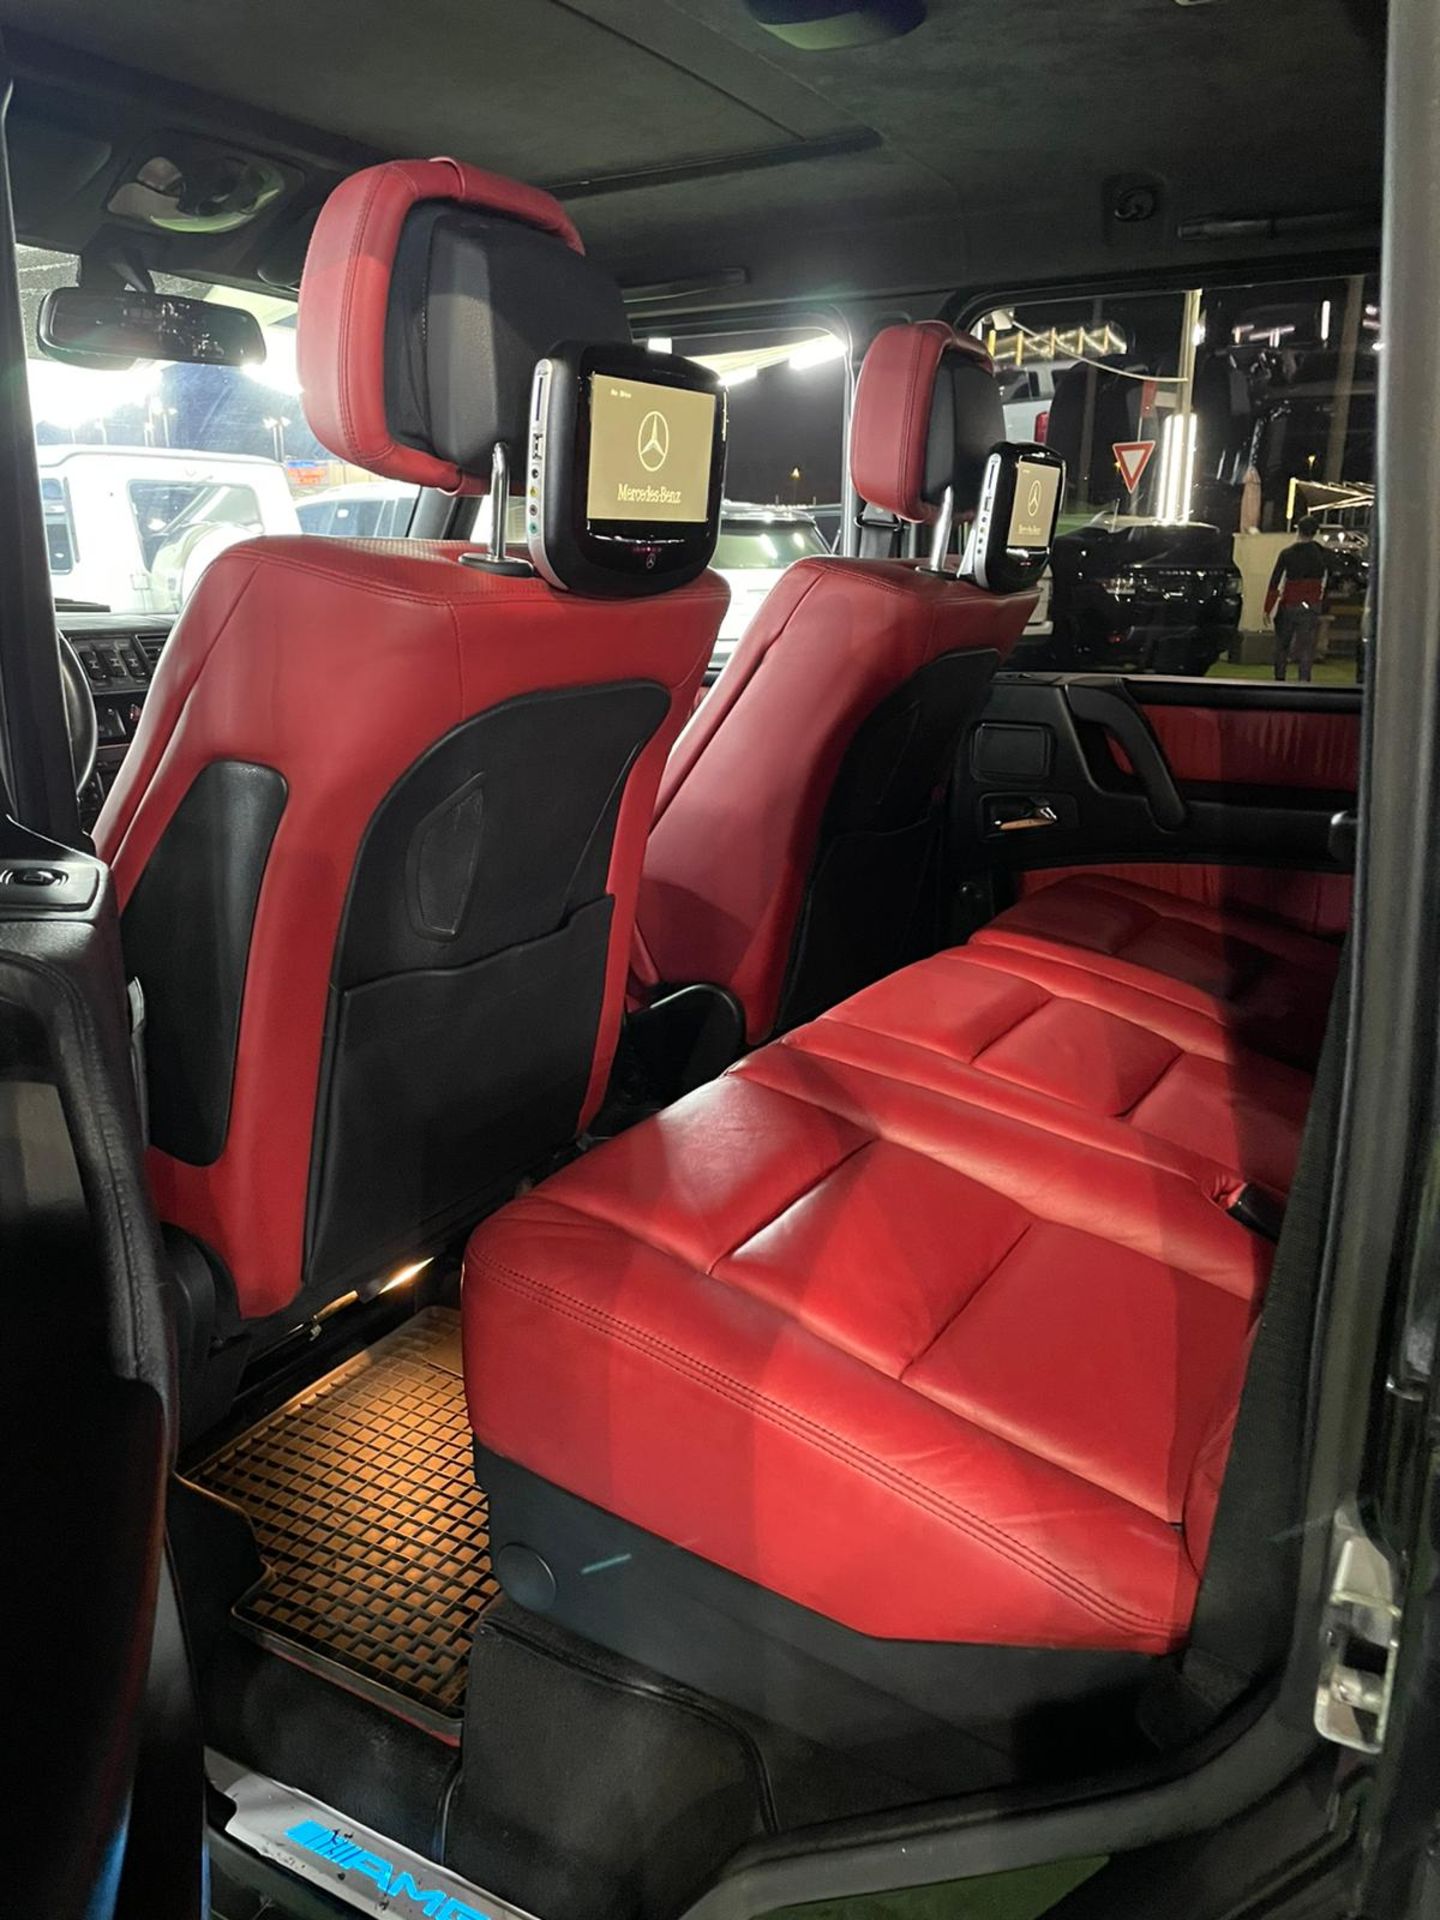 2011 MERCEDES G WAGON G55 changed to a 2020 G63 look Full outside exterior complete package !! - Image 23 of 36